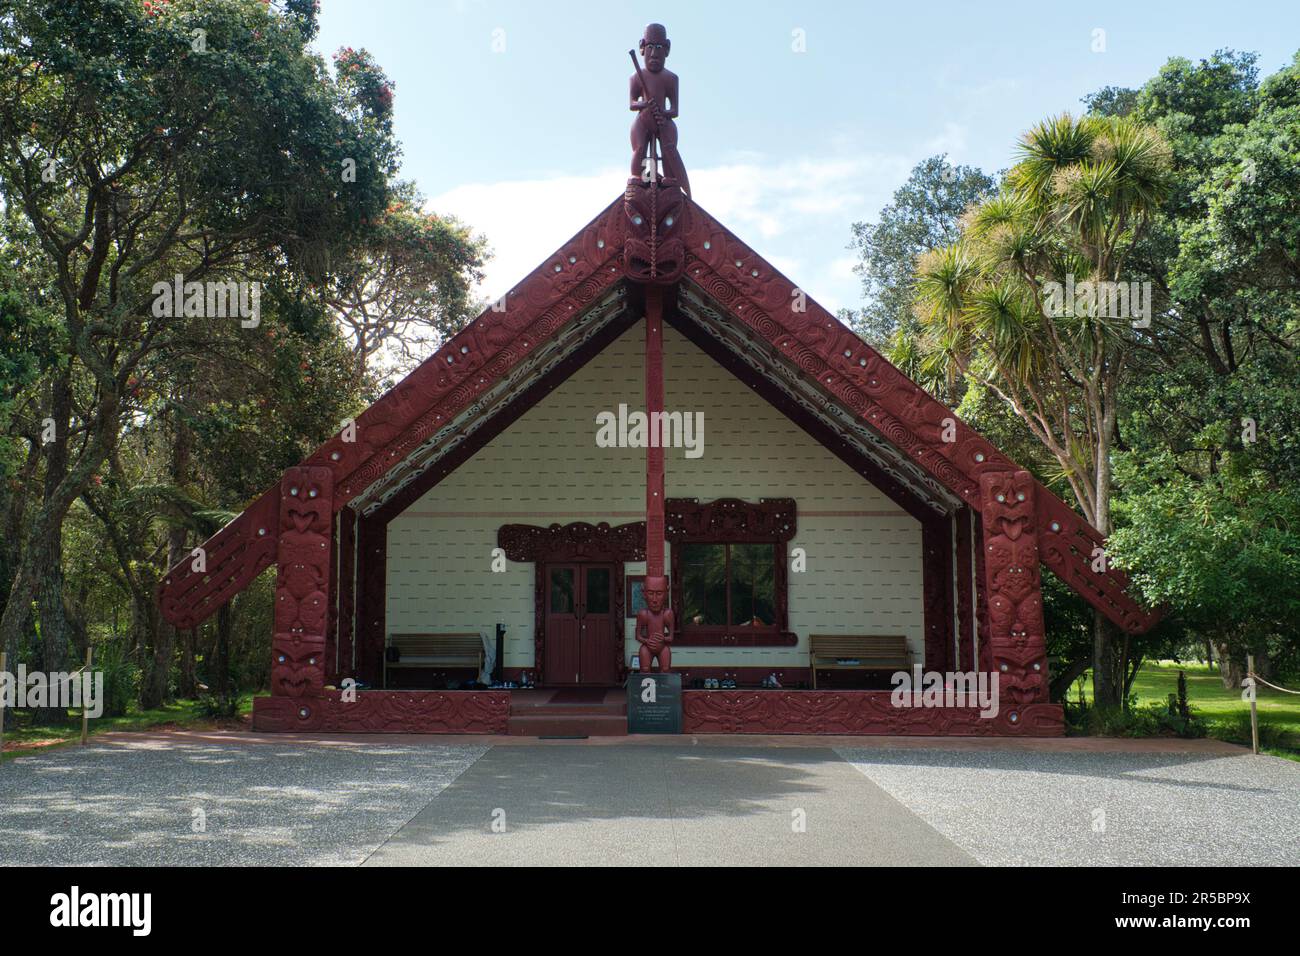 A red building with traditional Maori patterns. Waitangi Treaty Grounds, New Zealand. Stock Photo